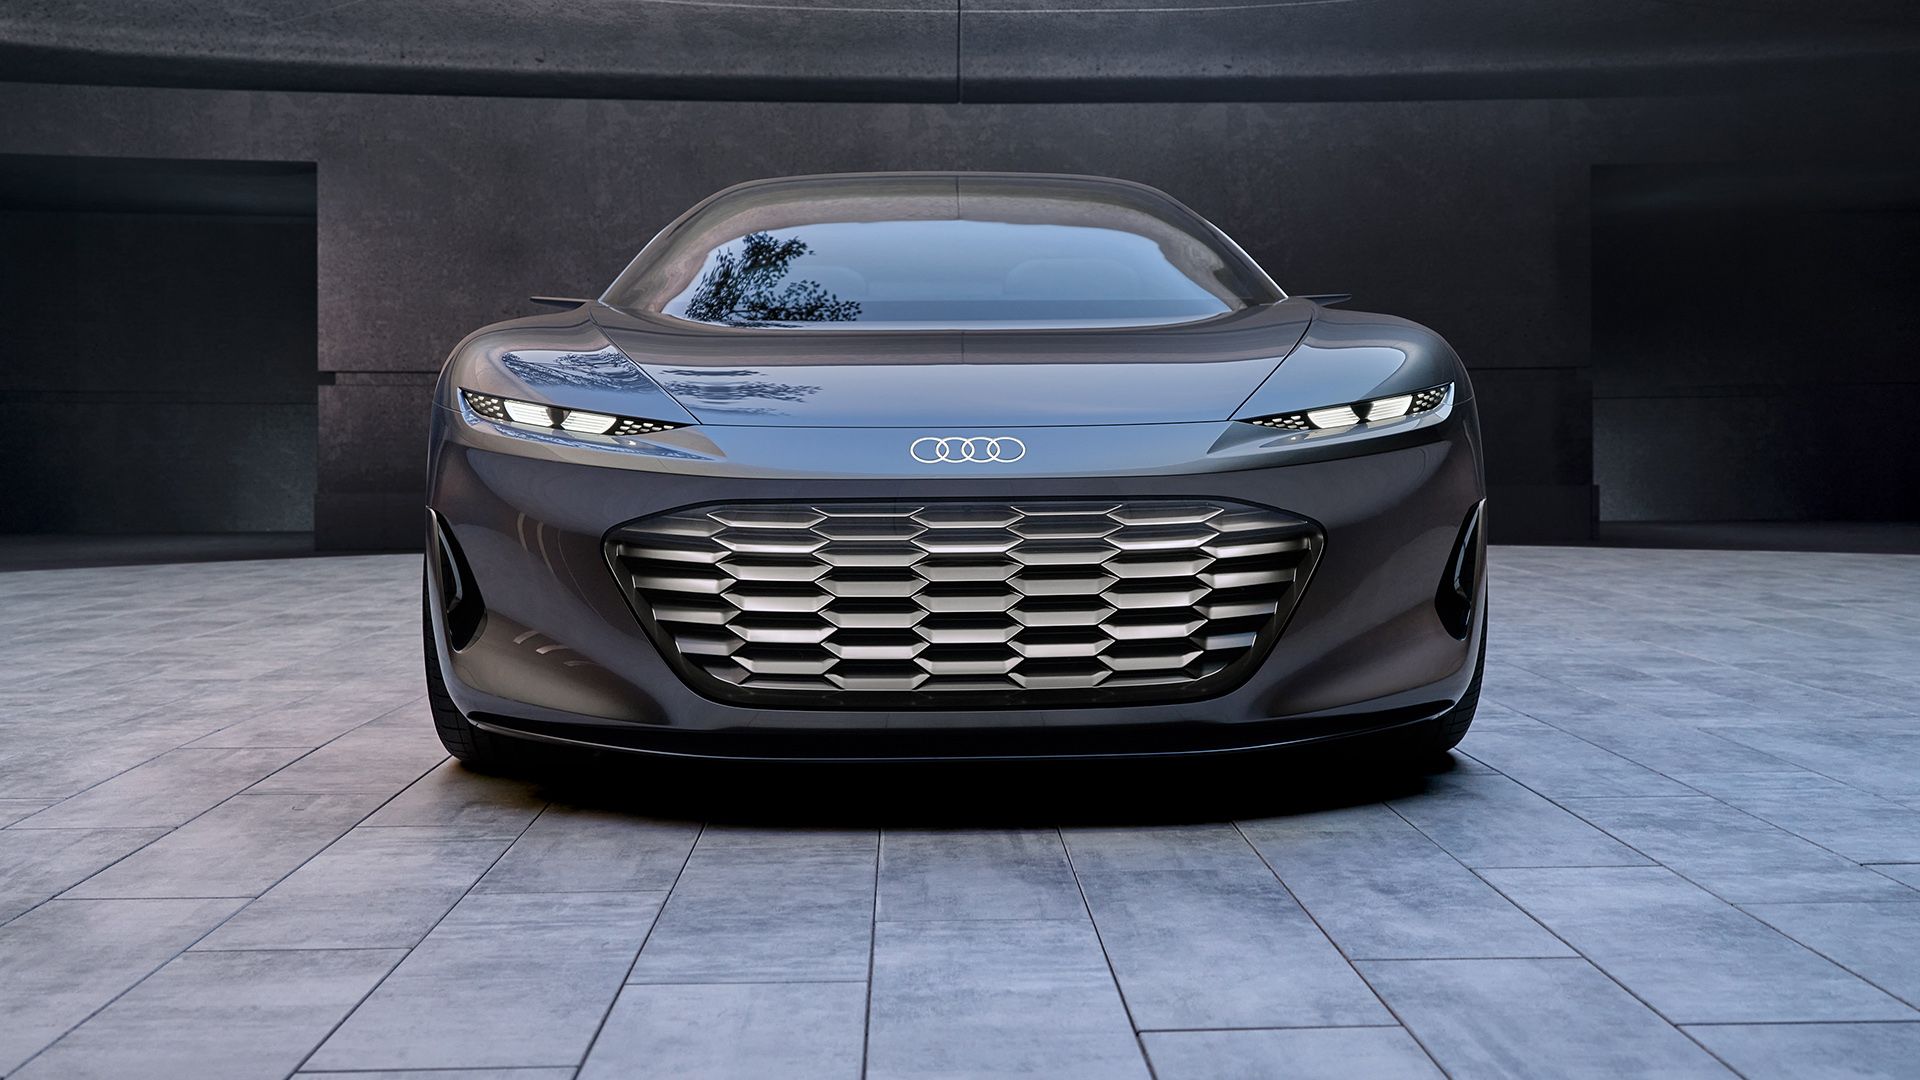 Front view of the Audi grandsphere concept with the new singleframe radiator grille.